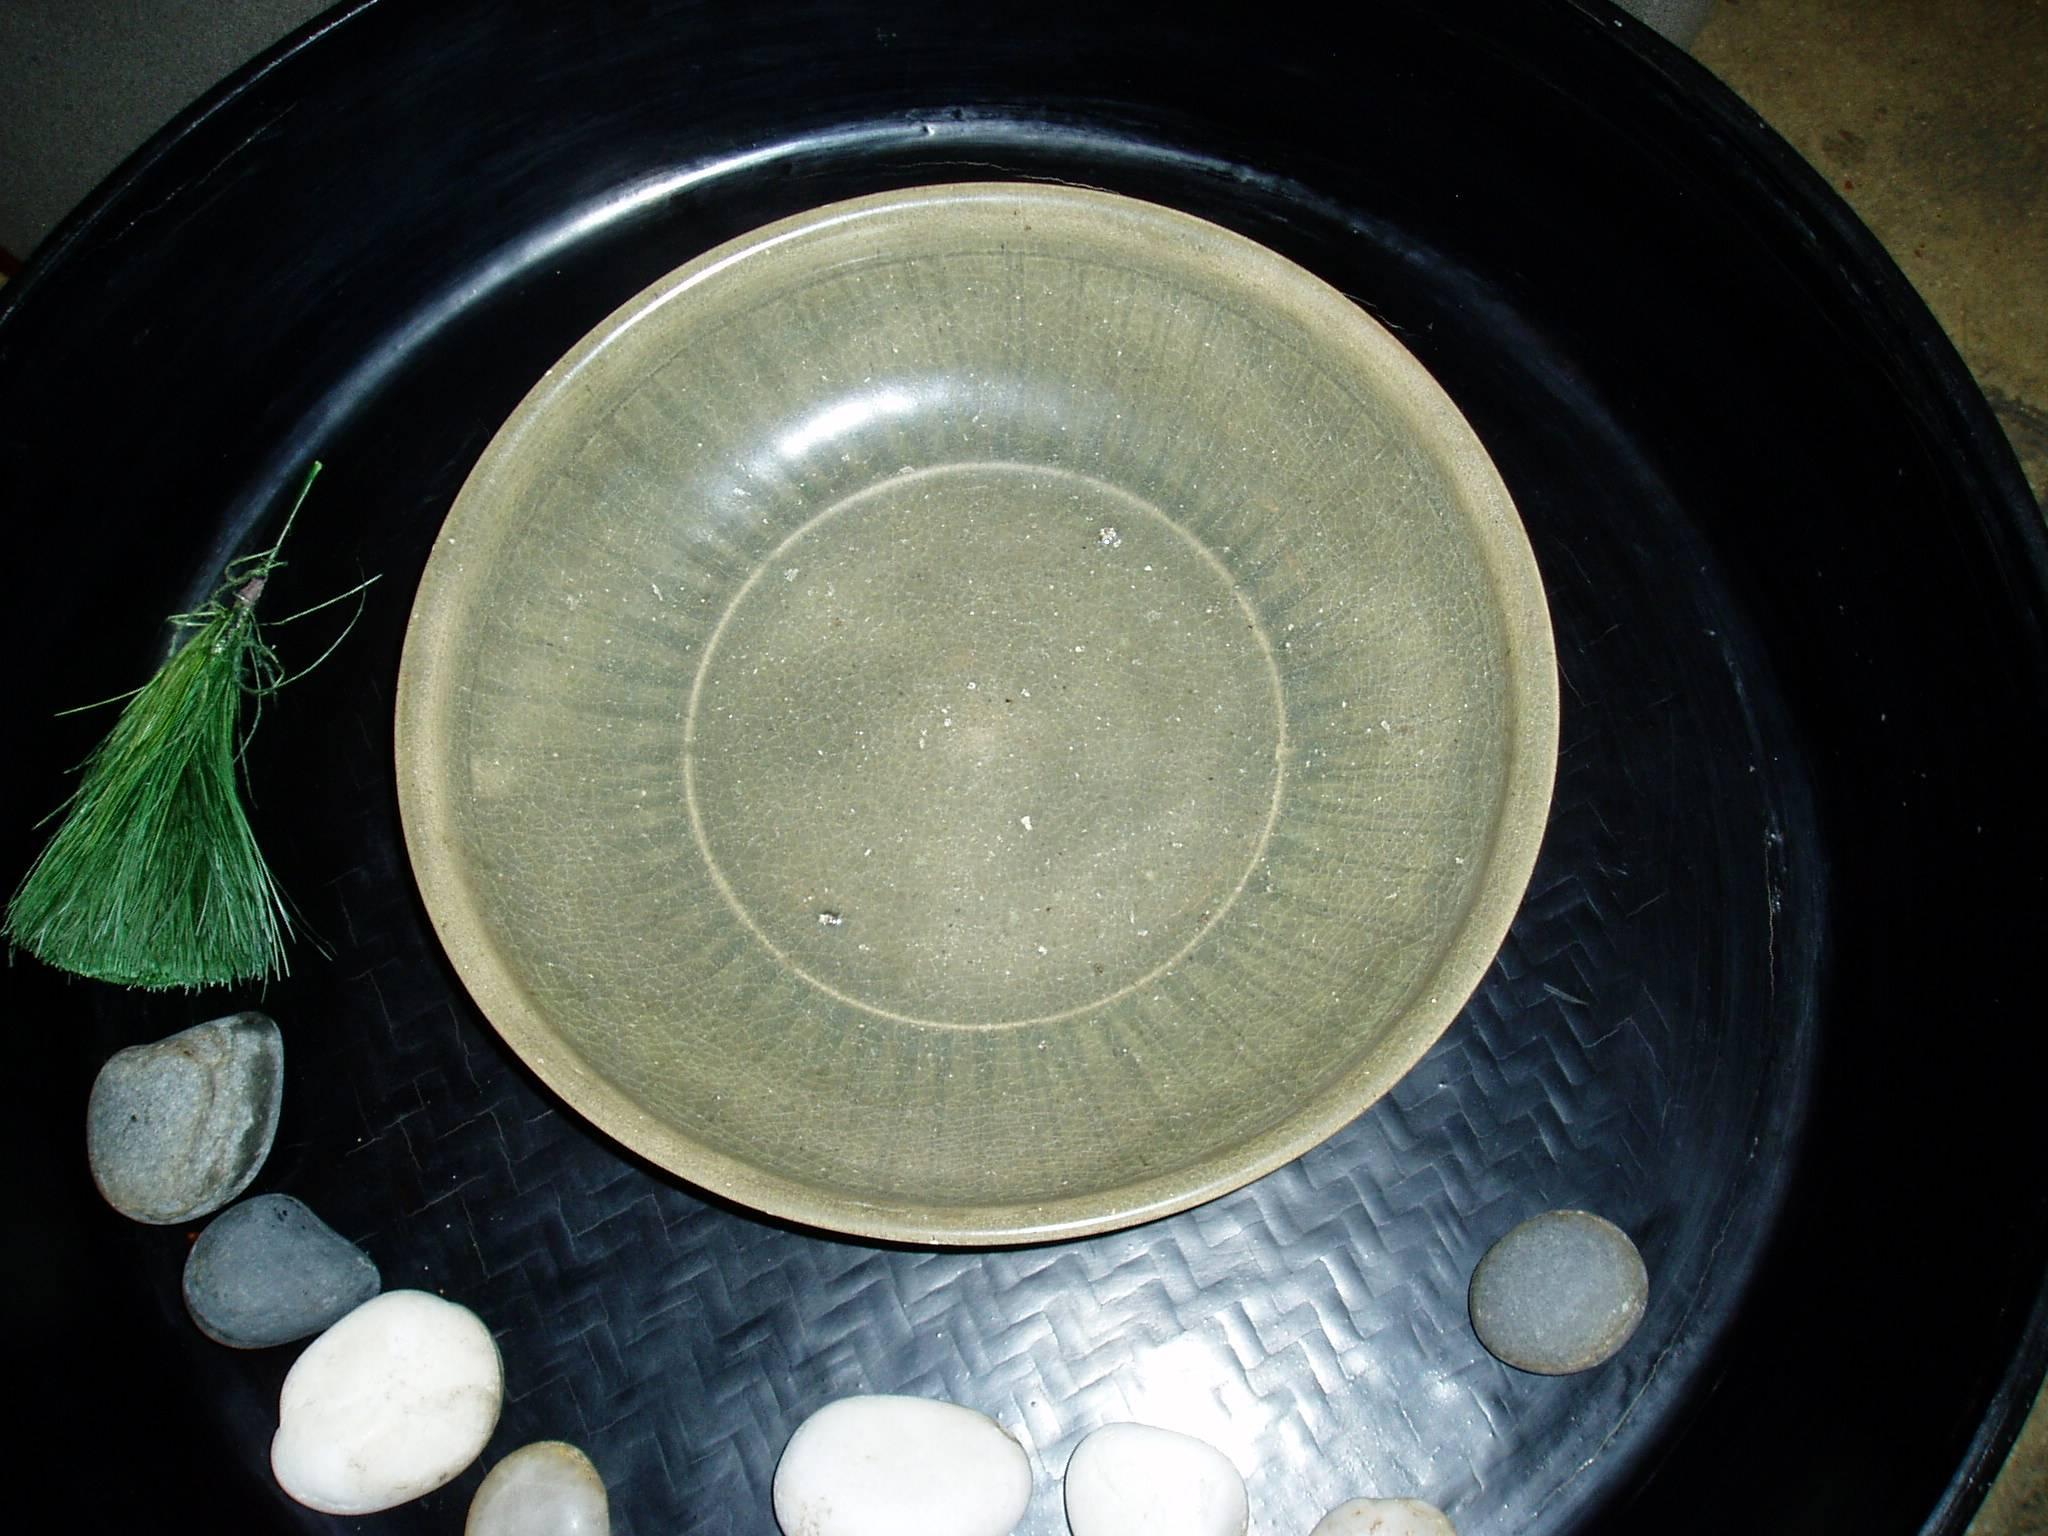 A ceramic plate from Myanmar (formerly Burma), finished in traditional Celadon glaze.